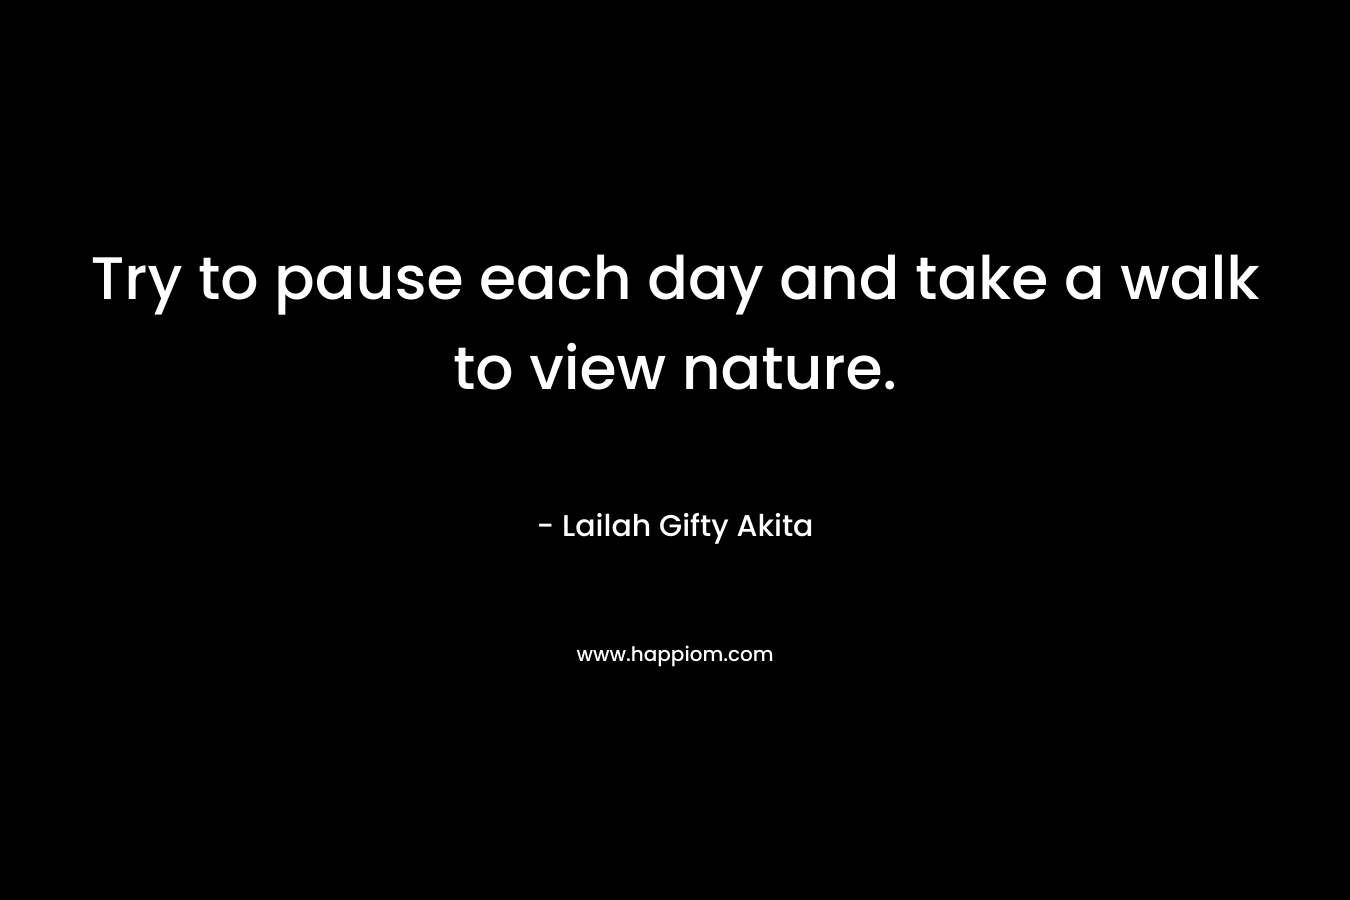 Try to pause each day and take a walk to view nature.